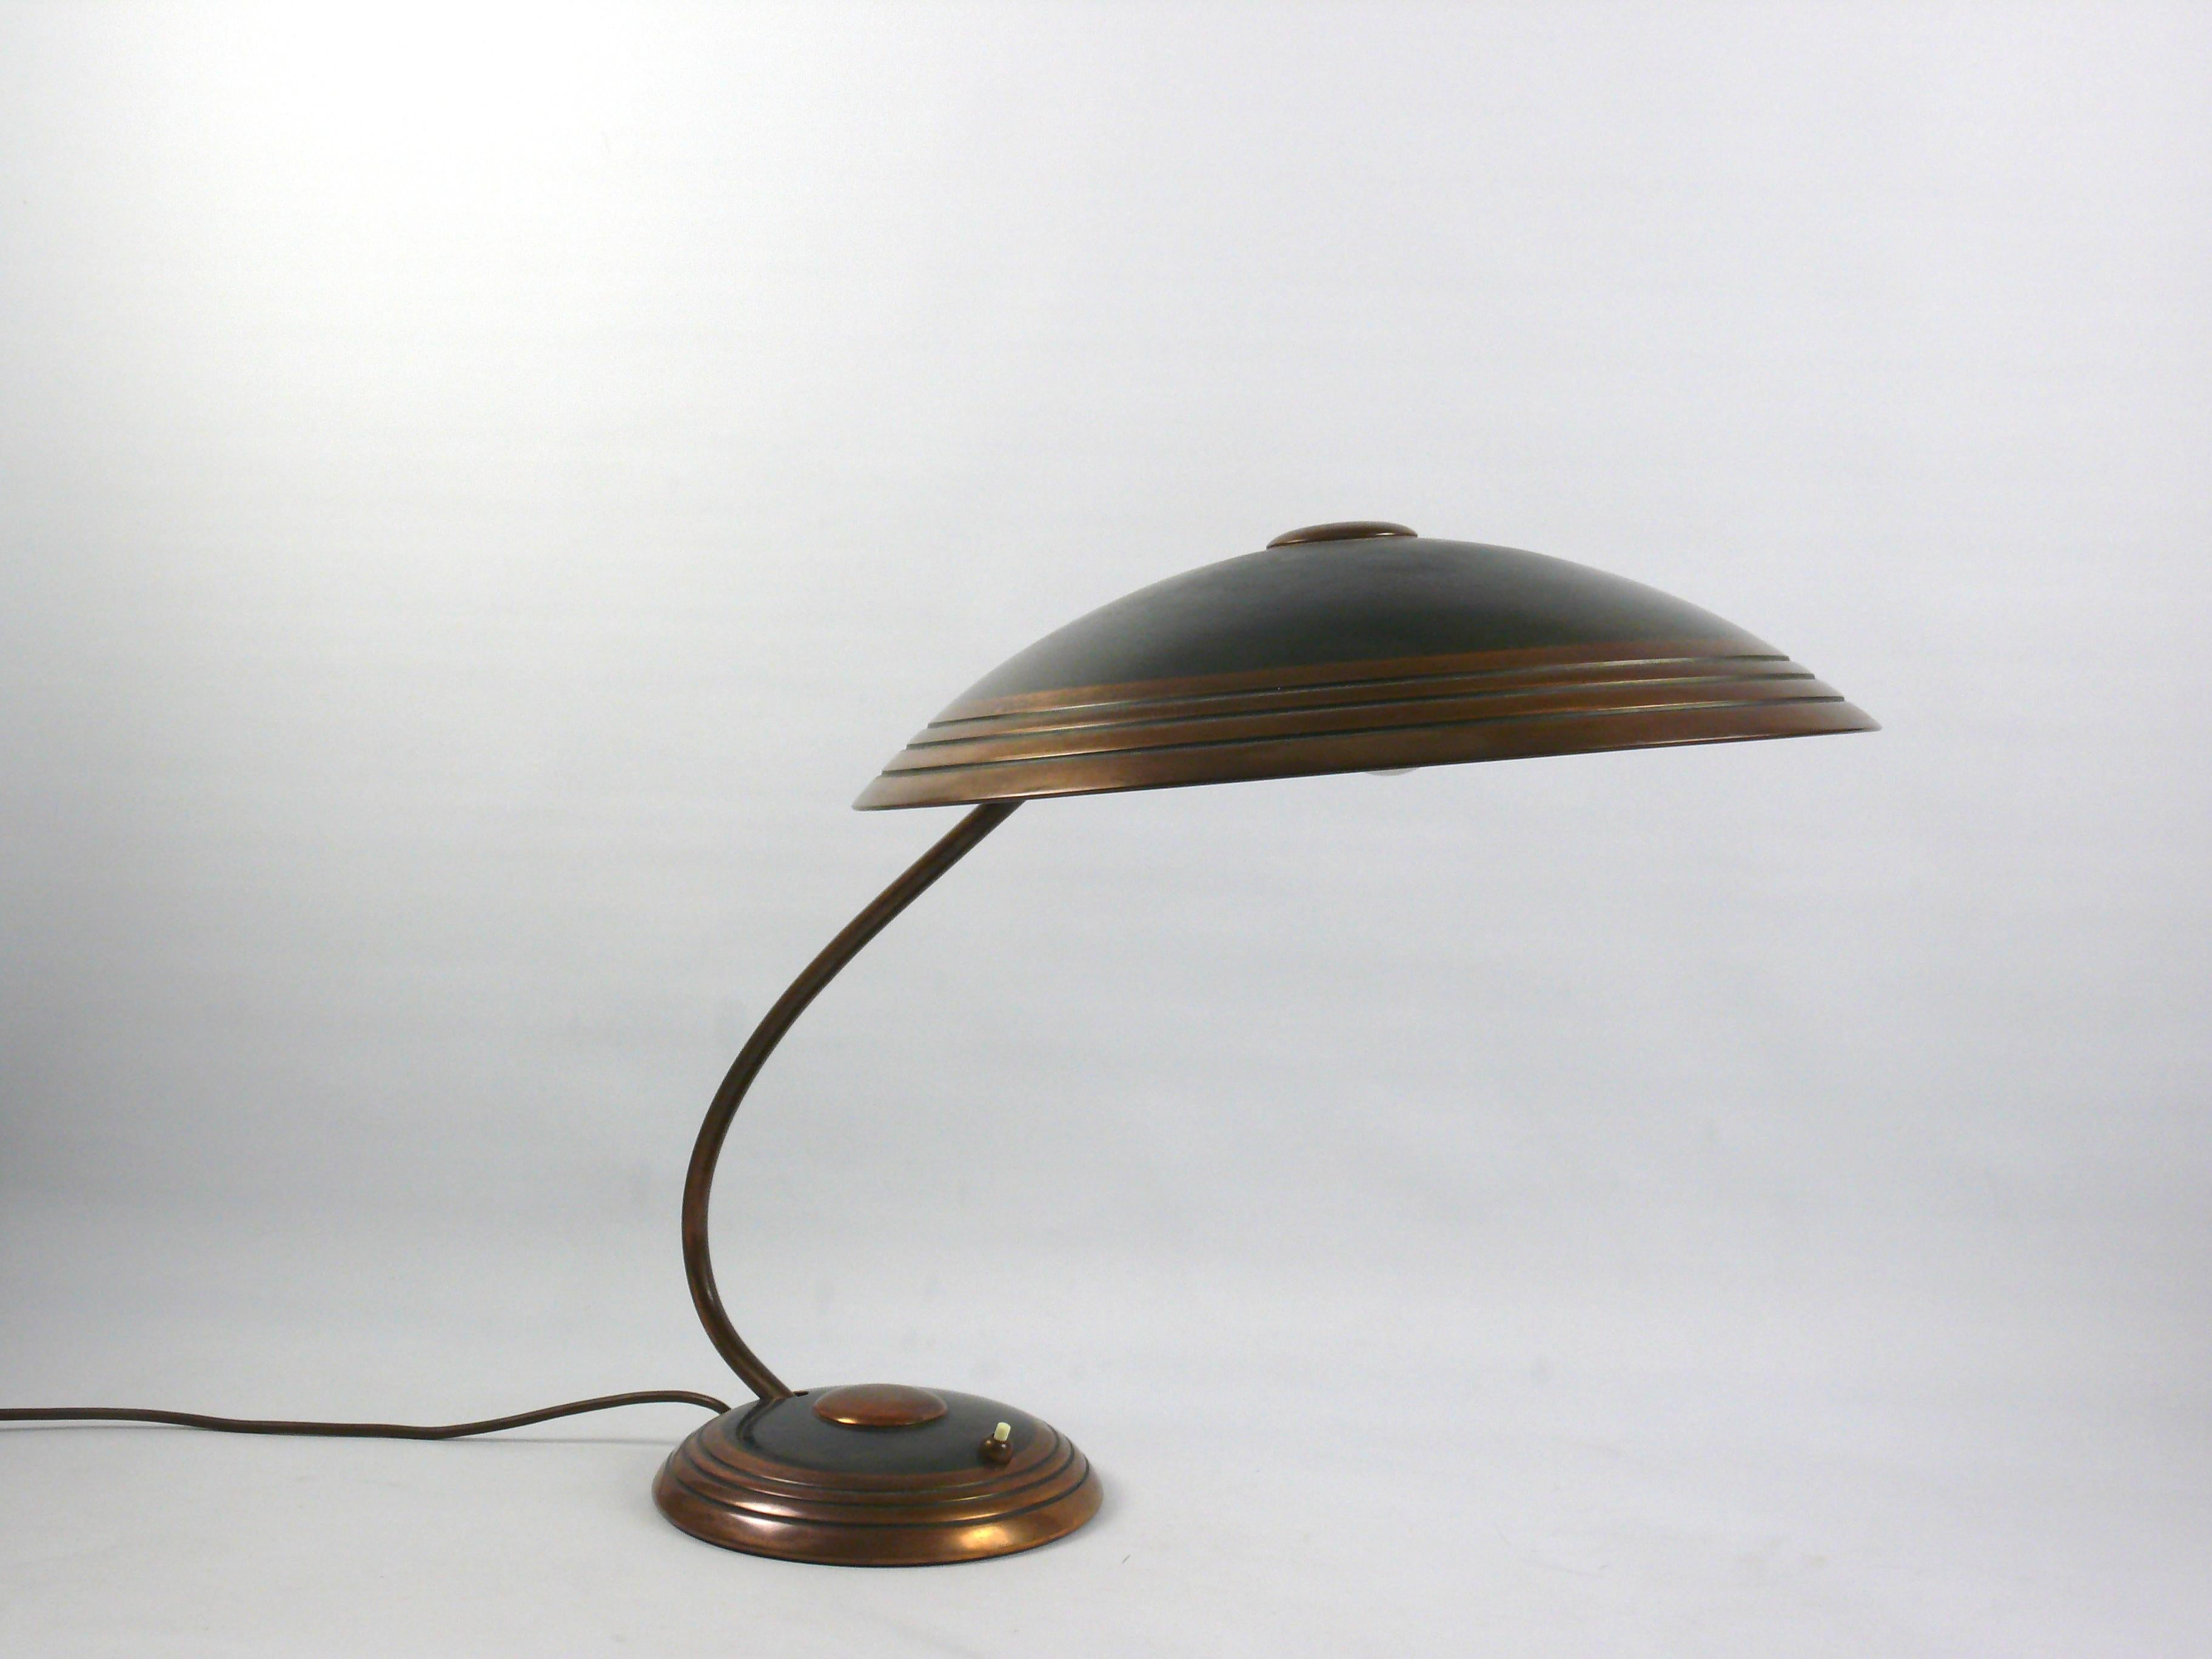 Large Helo table lamp with a very large shade and copper-plated brass areas - a timeless classic from the 1950s. Stylistically, the design of the lamp is based on the Bauhaus period. The lampshade can be adjusted in many ways using a ball joint. The